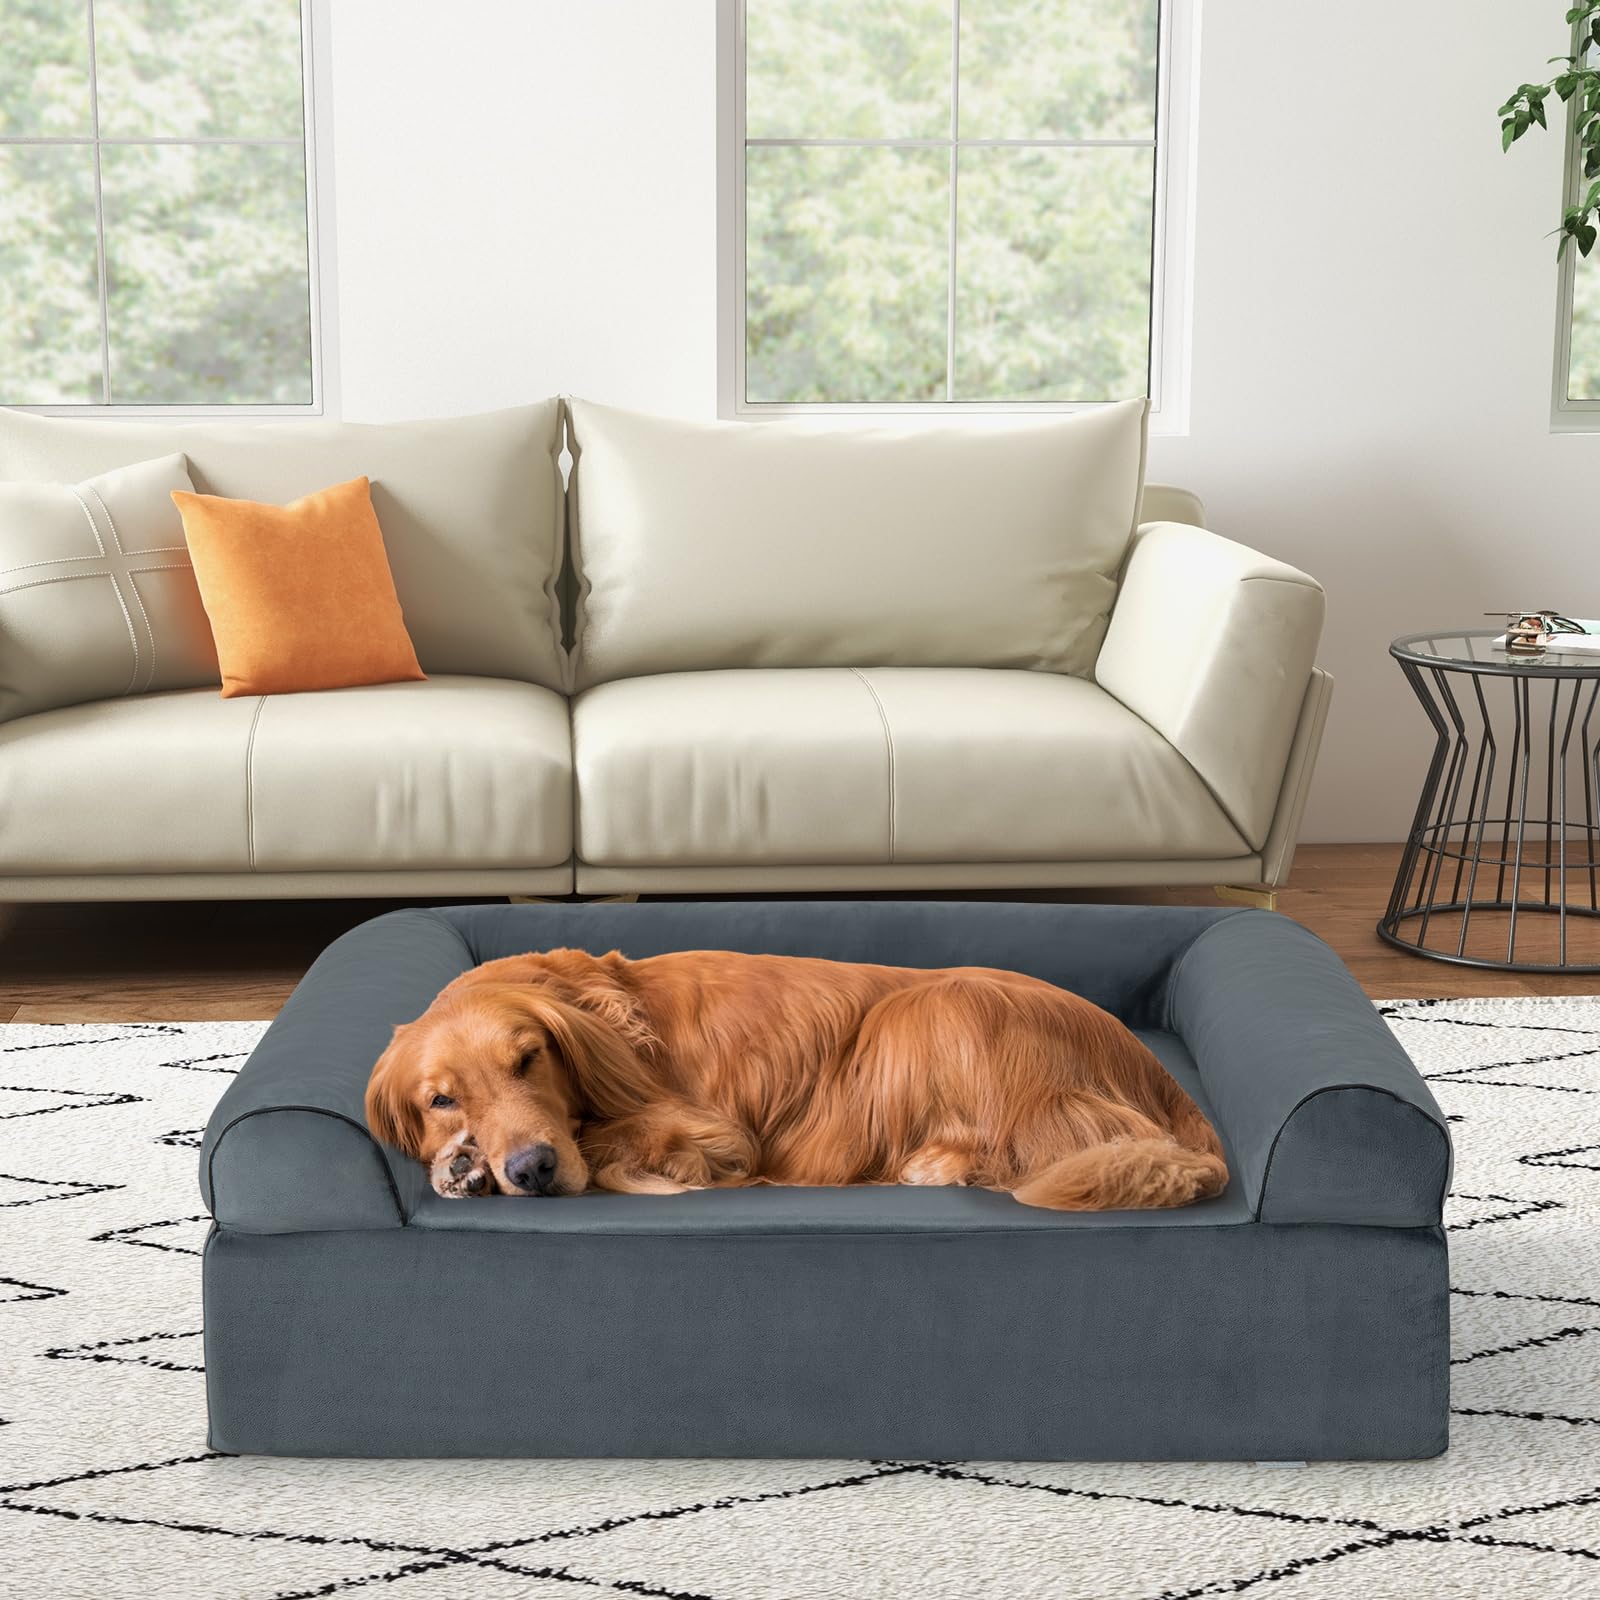 Giantex Cooling Gel Dog Bed for Large Dogs, 40" L Memory Foam Dog Sofa Bed with Washable Cover